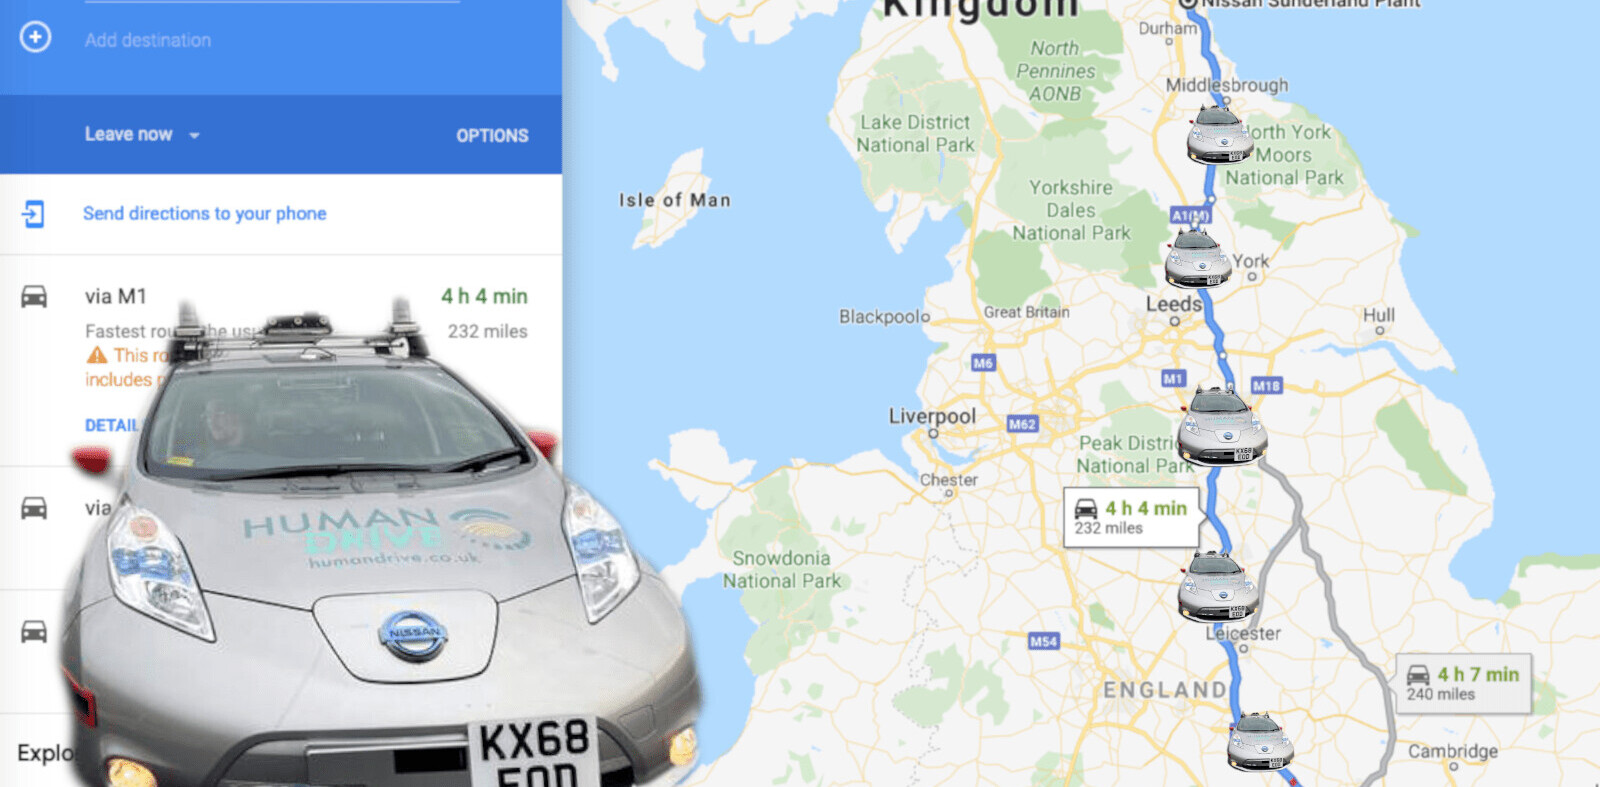 A tricked-out Nissan Leaf just completed Britain’s longest fully autonomous drive